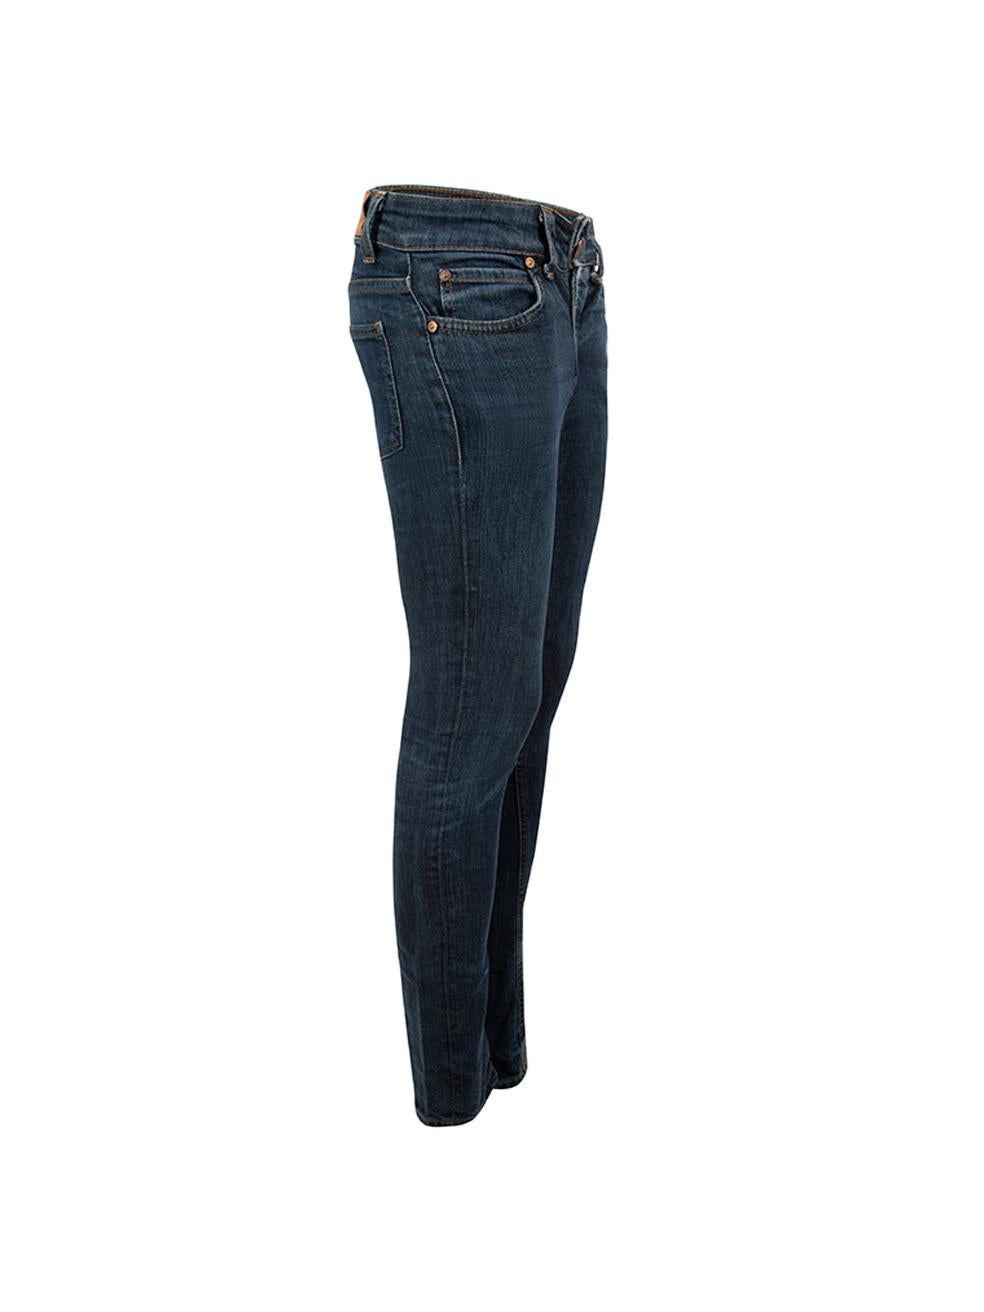 CONDITION is Very good. Minimal wear to jeans is evident. Minimal wear to the interior of the jeans where stains can be seen on this used Acne Jeans designer resale item. Details Blue Denim Straight leg jeans Low rise Regular length Front zip